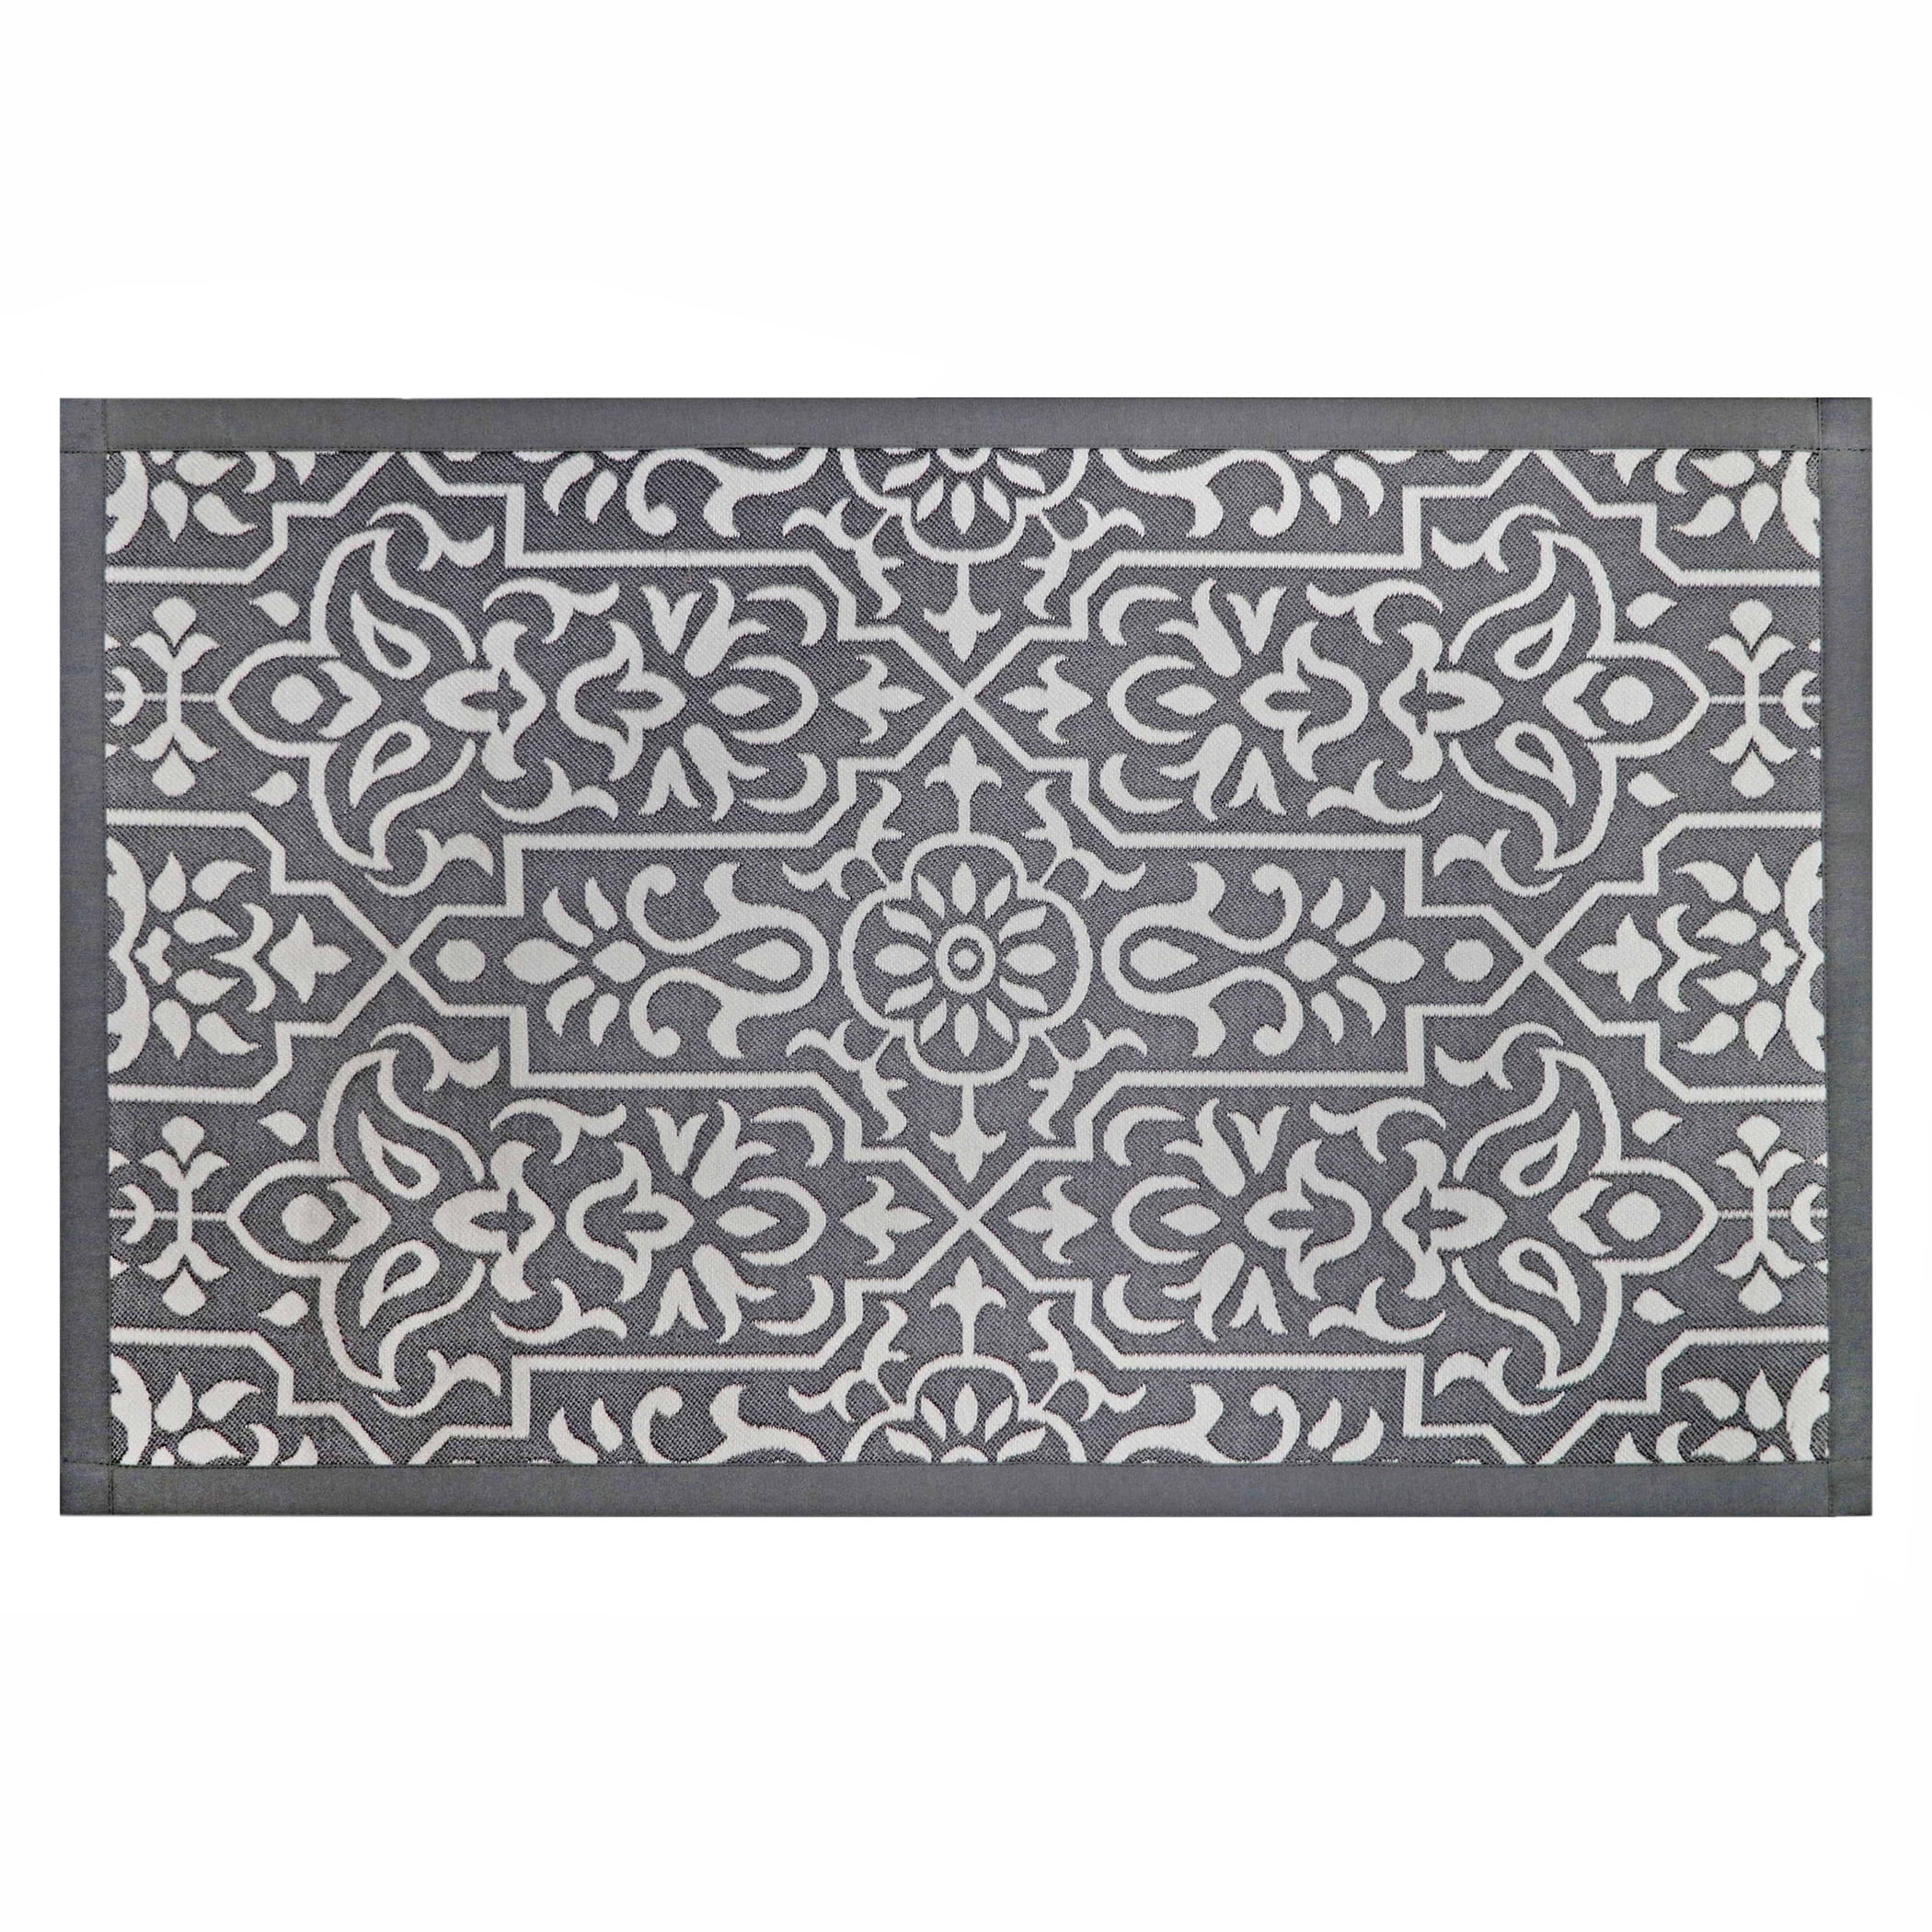 Fashion Medallion Pattern Rug Comfortable Standing and Entrance Rug Kitchen 17 x 28 Grey Floor Mat Non-Skid Home 